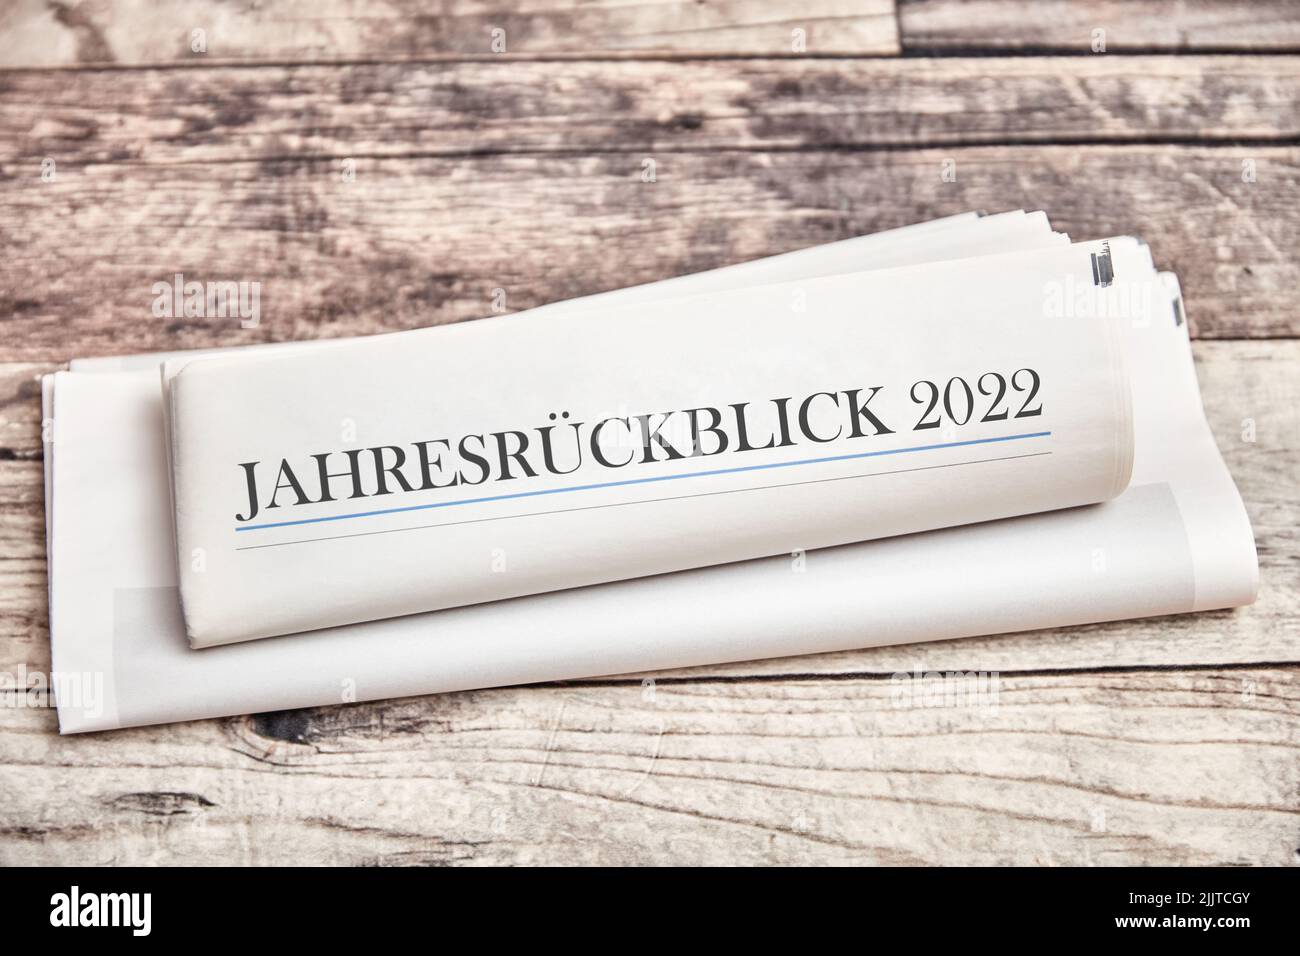 Jahresrückblick 2022 (German for: Review / year in review 2022) on a folded newspaper as a front page Stock Photo